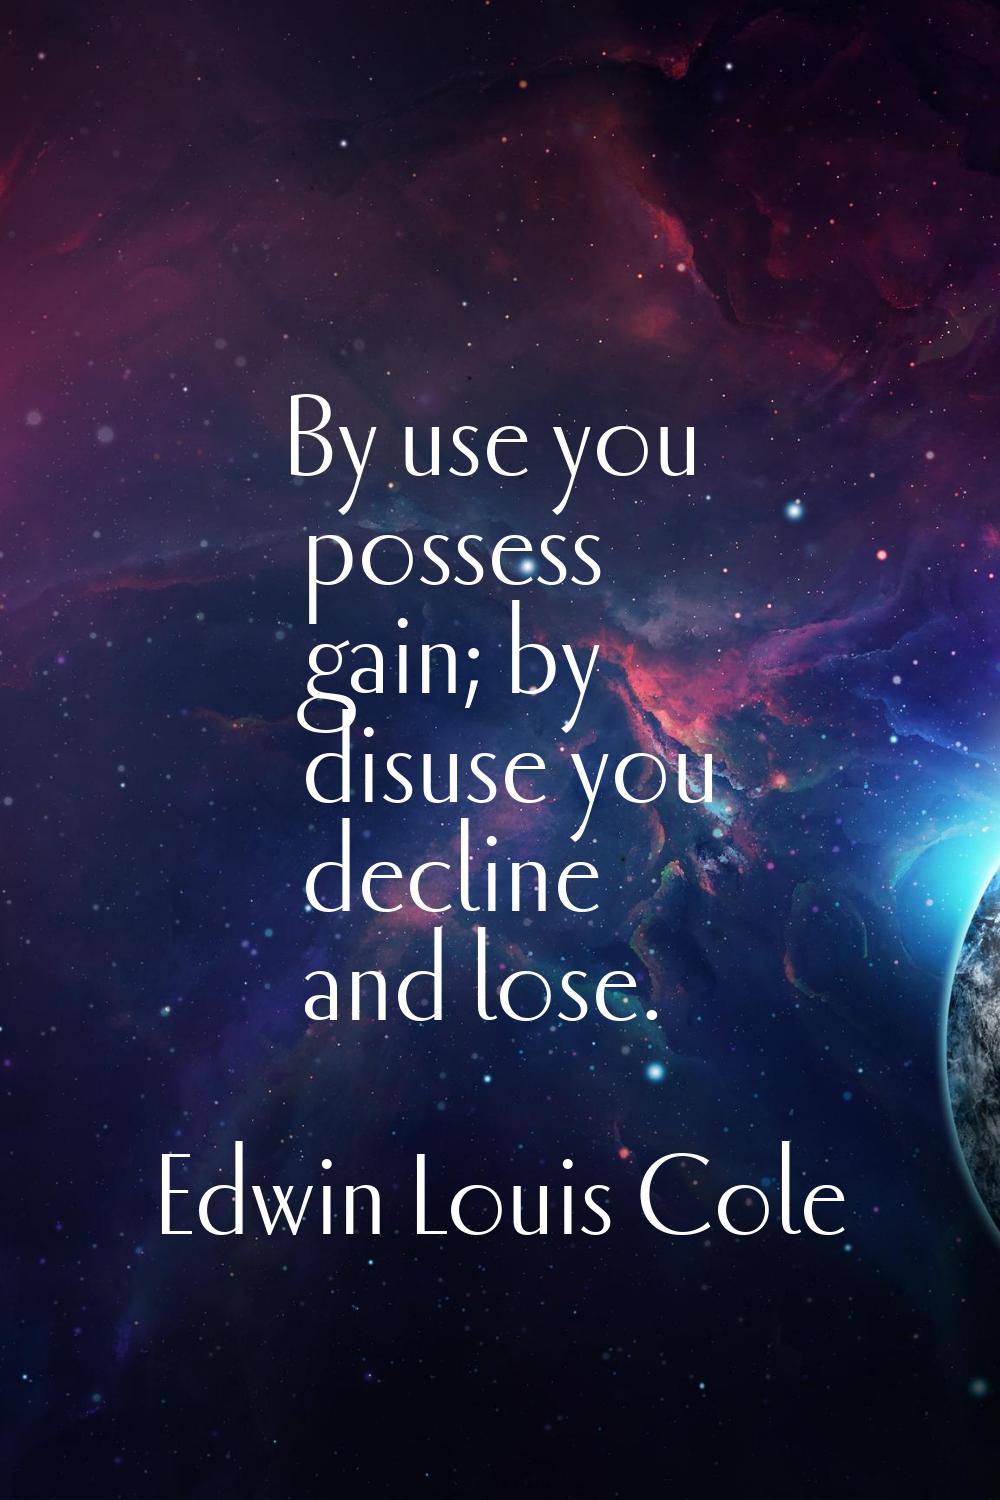 By use you possess gain; by disuse you decline and lose.